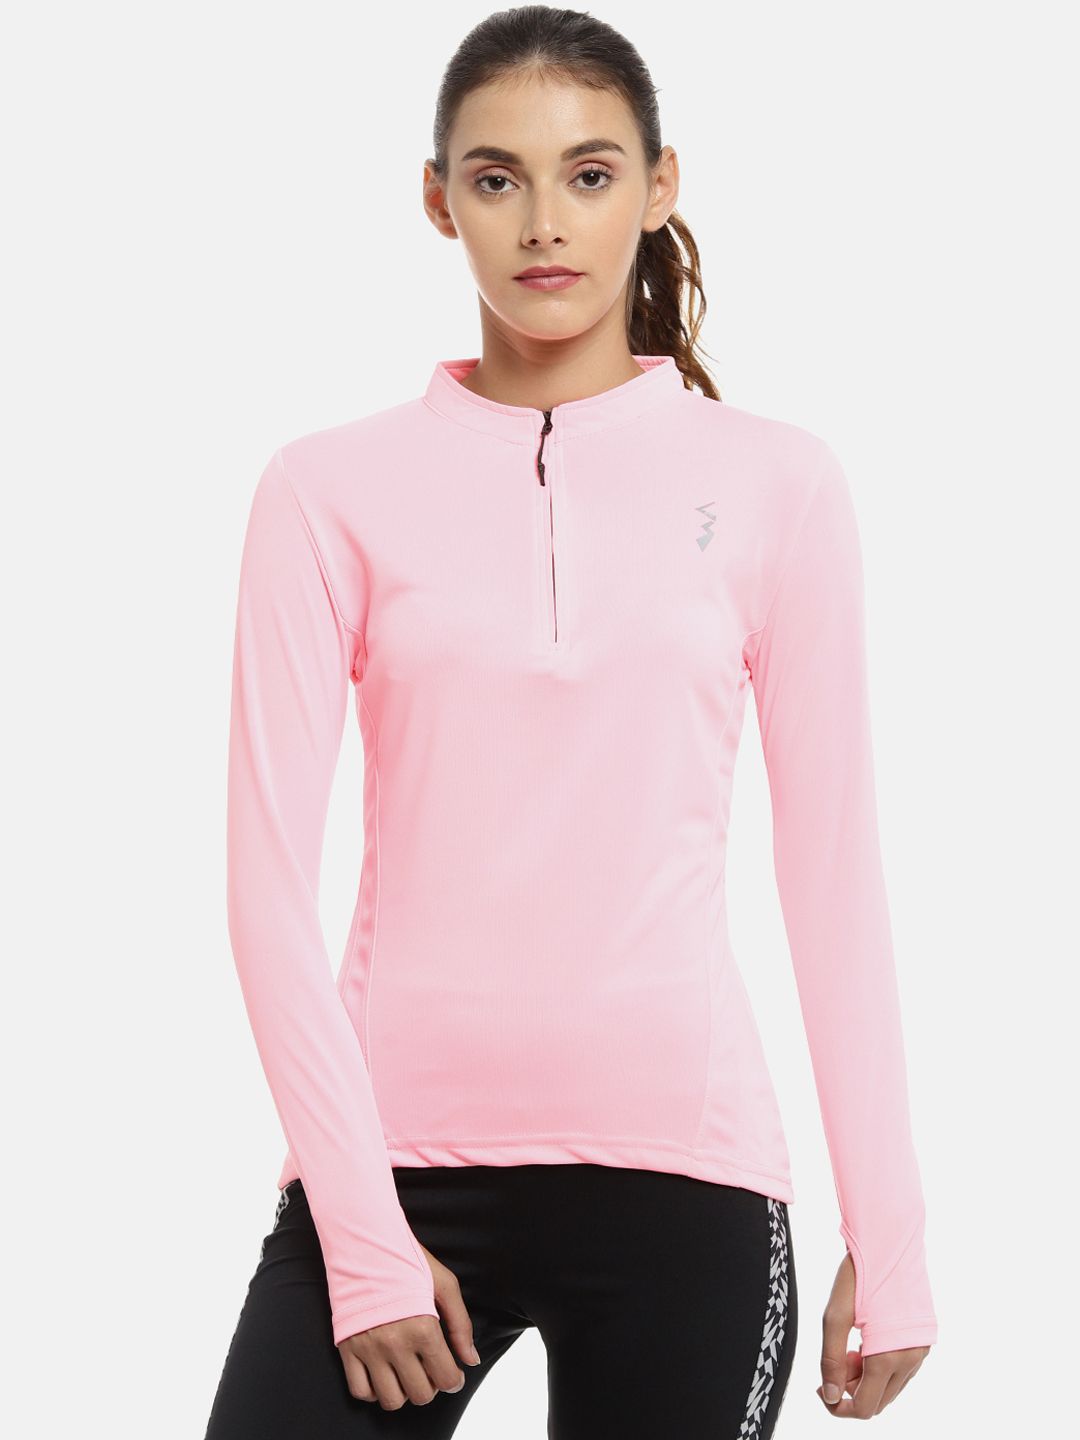 Campus Sutra Women Pink Solid High Neck T-shirt Price in India